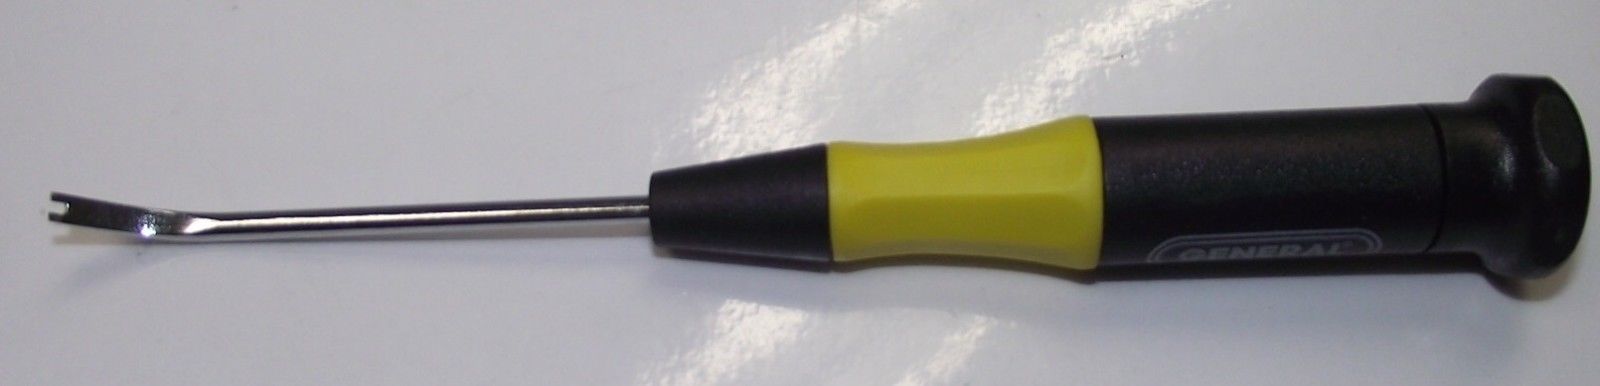 General Tools 71002Y Precision Lifter Yellow